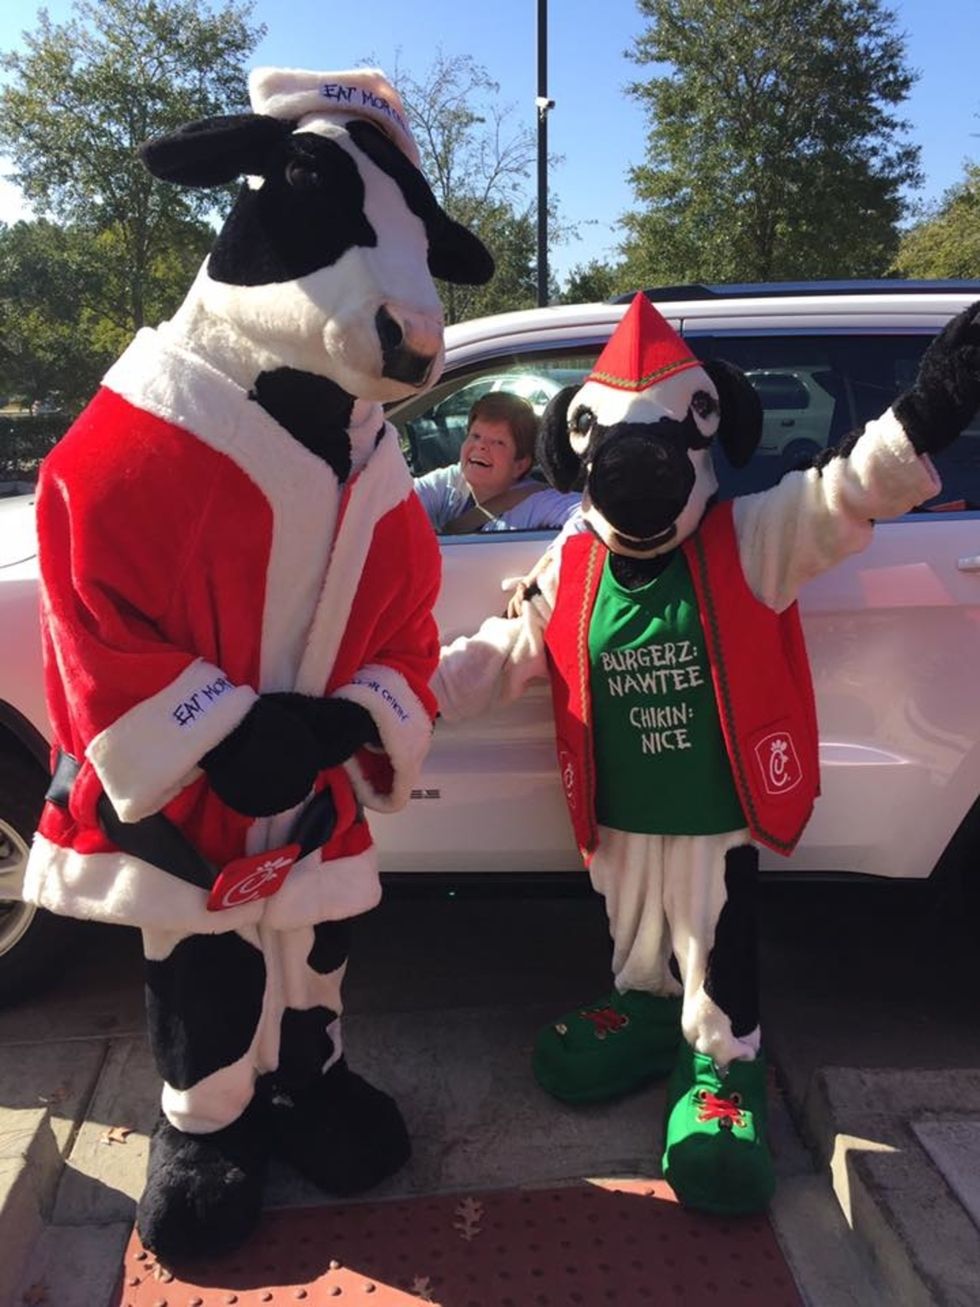 A Goodbye Letter To Chick-Fil-A